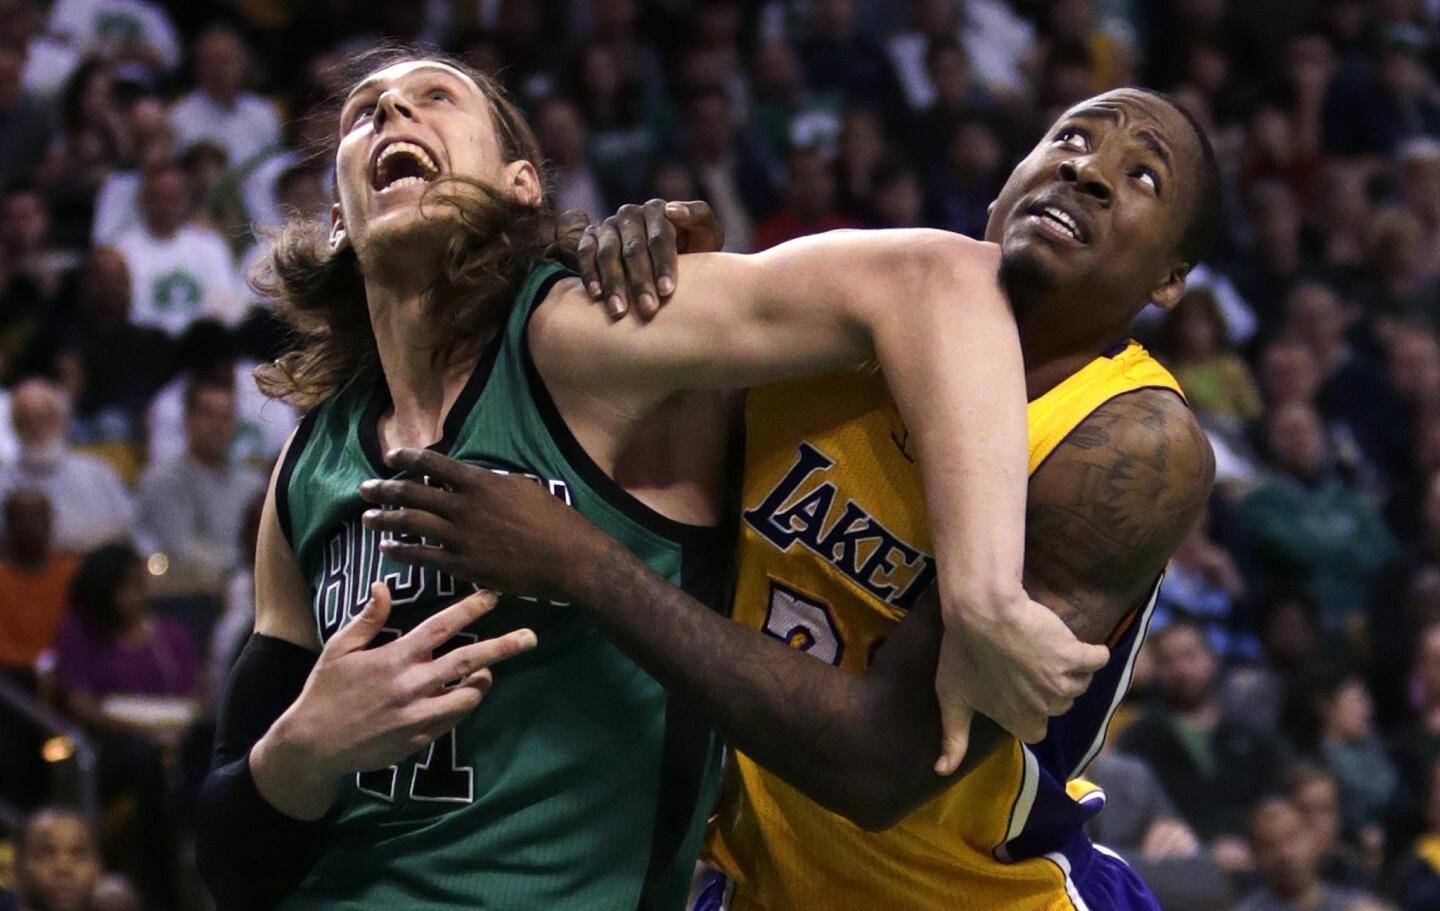 Celtics center Kelly Olynyk tries to hold his rebounding position against Lakers forward Ed Davis in the second half.